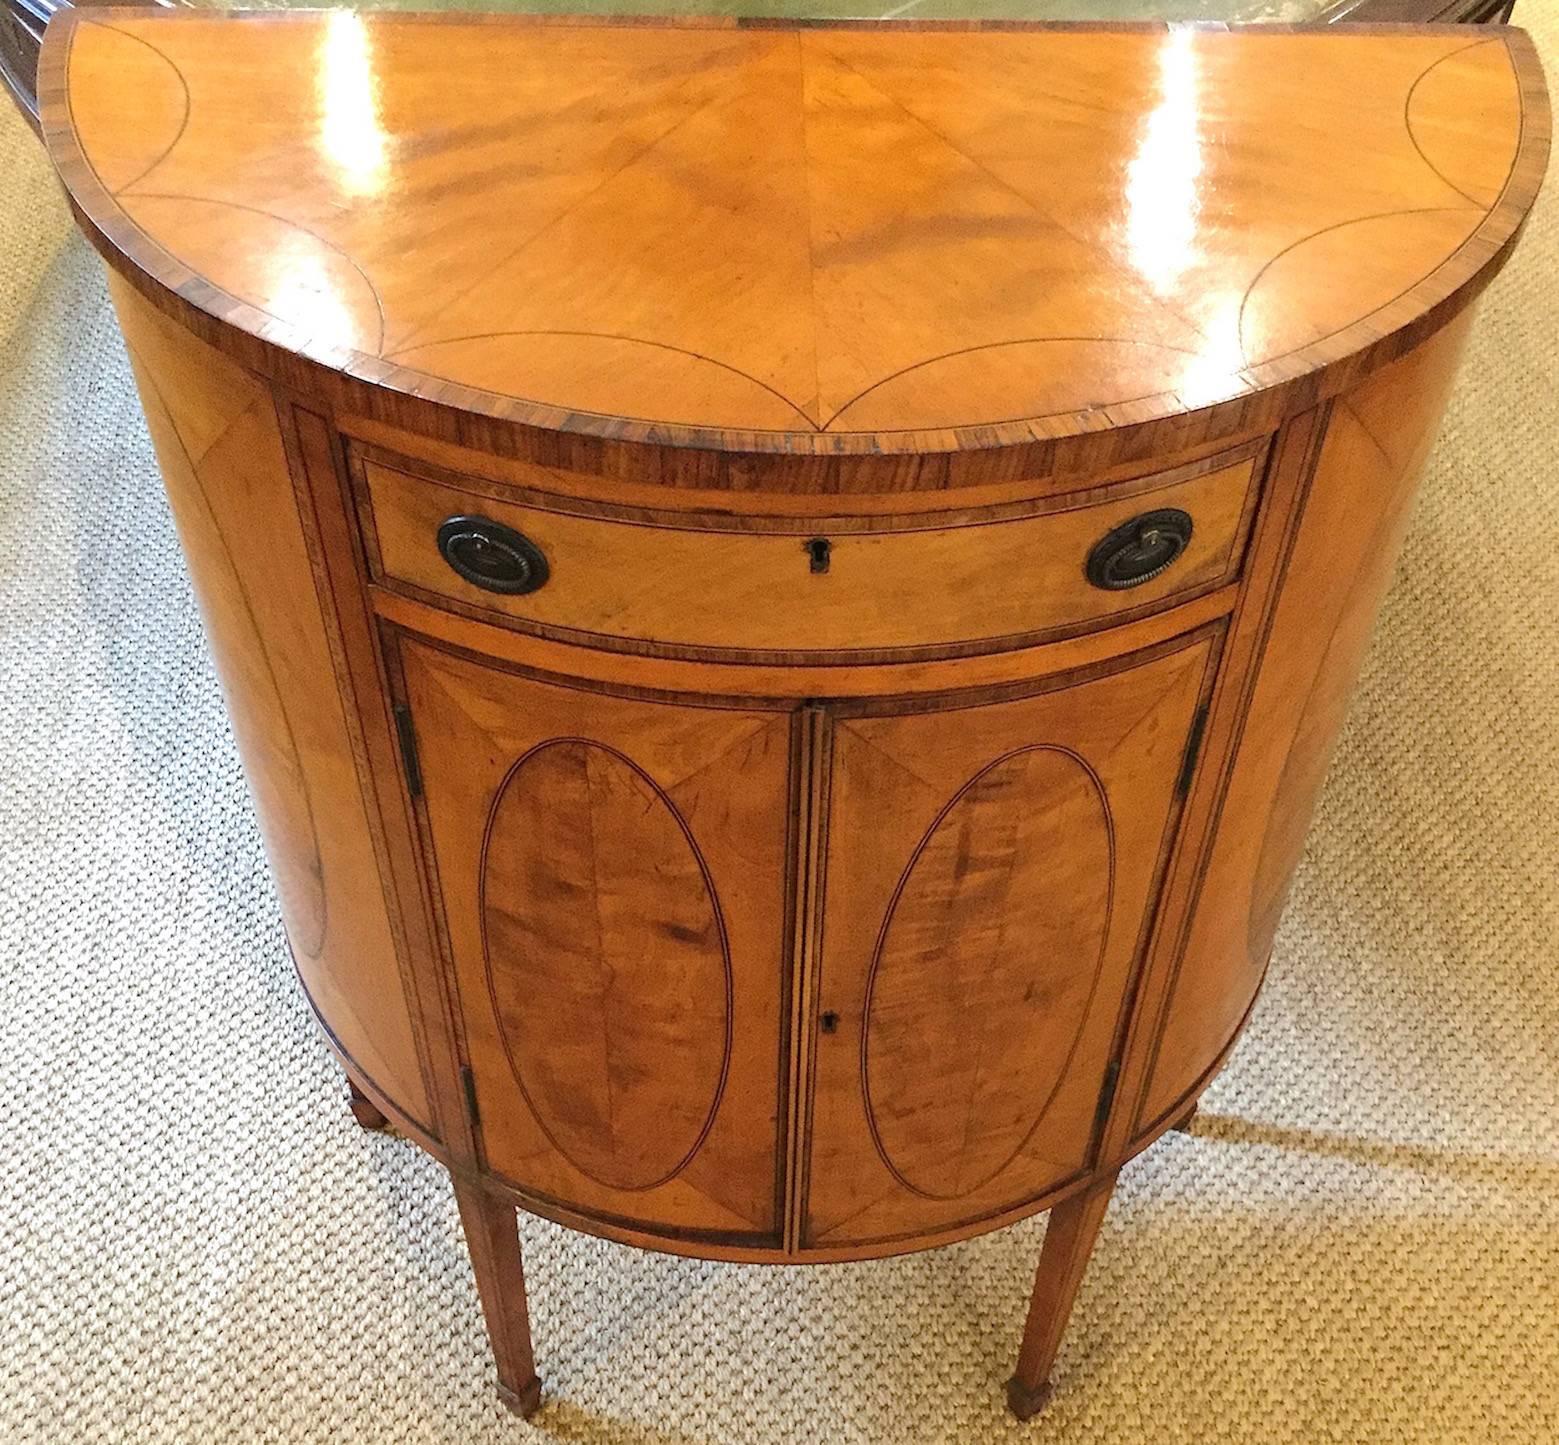 18th century demilune satinwood commode of small proportions, in the manner of Mayhew & Ince

A superb Sheraton period late 18th century semi-ovoid satinwood commode of small proportions, in the manner of Mayhew & Ince, circa 1780-1790.
The top